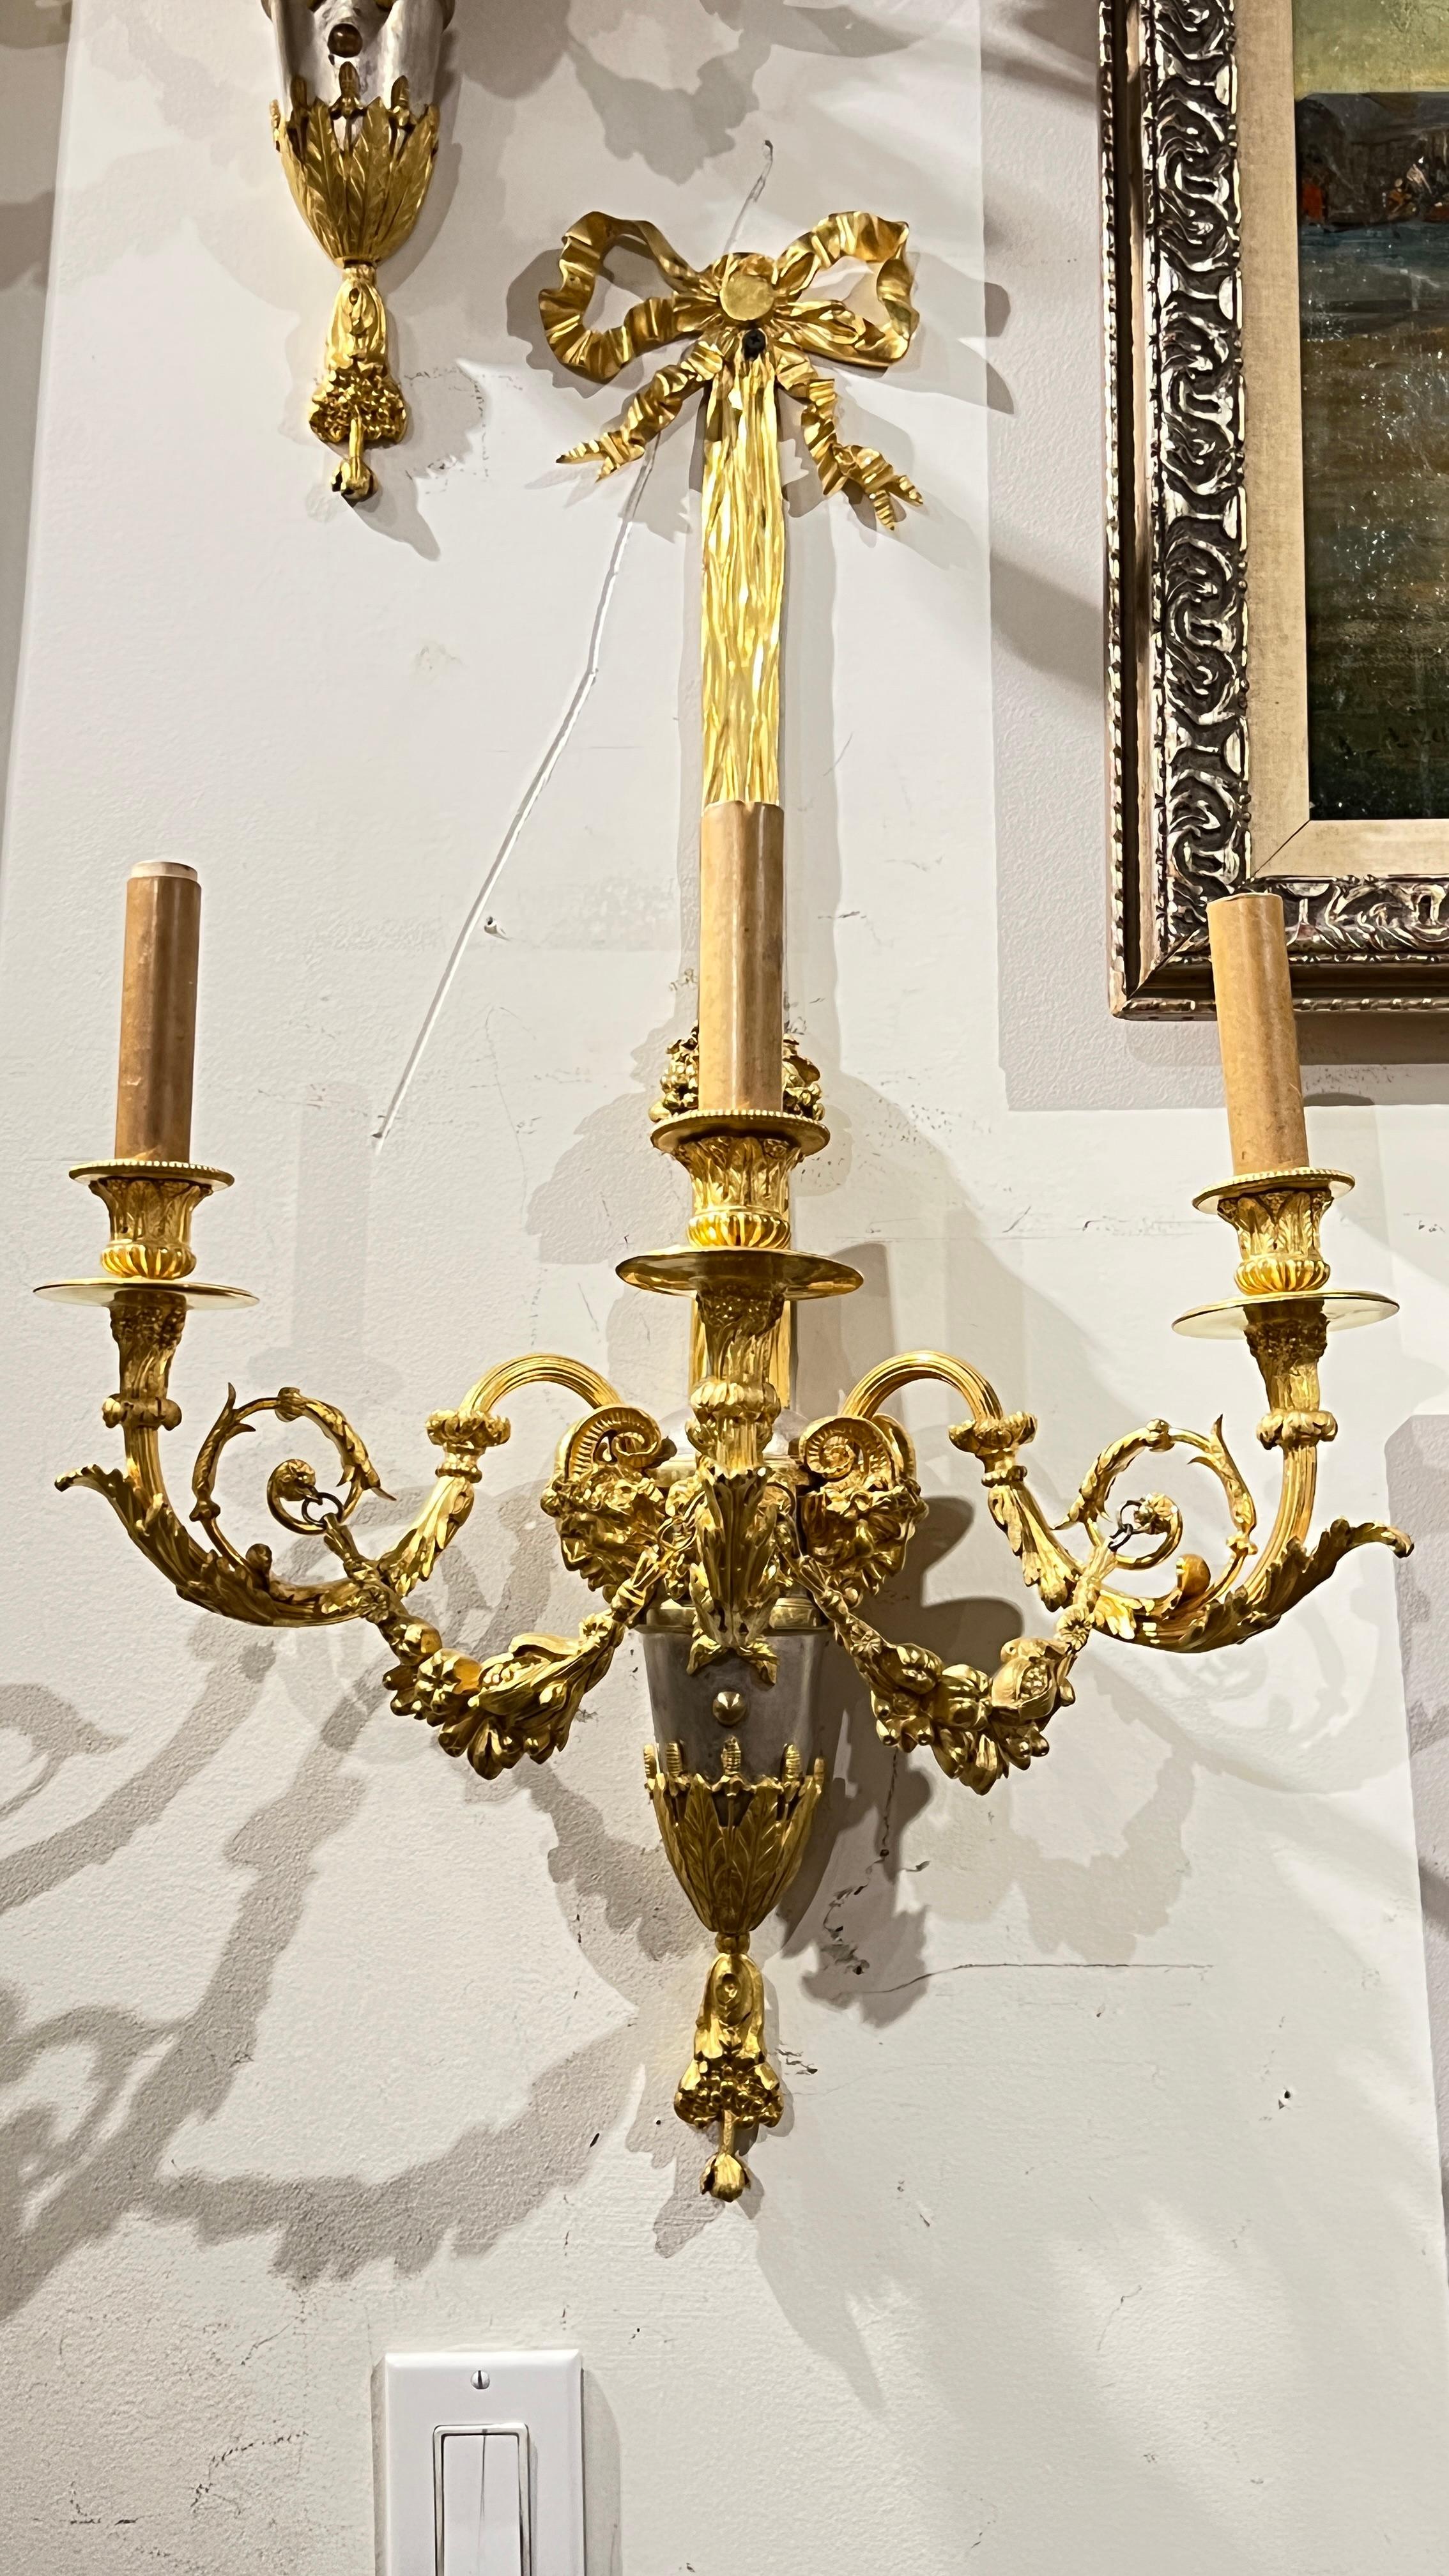 Pair of very fine quality French Louis XVI style silver and gilt bronze Sconces.